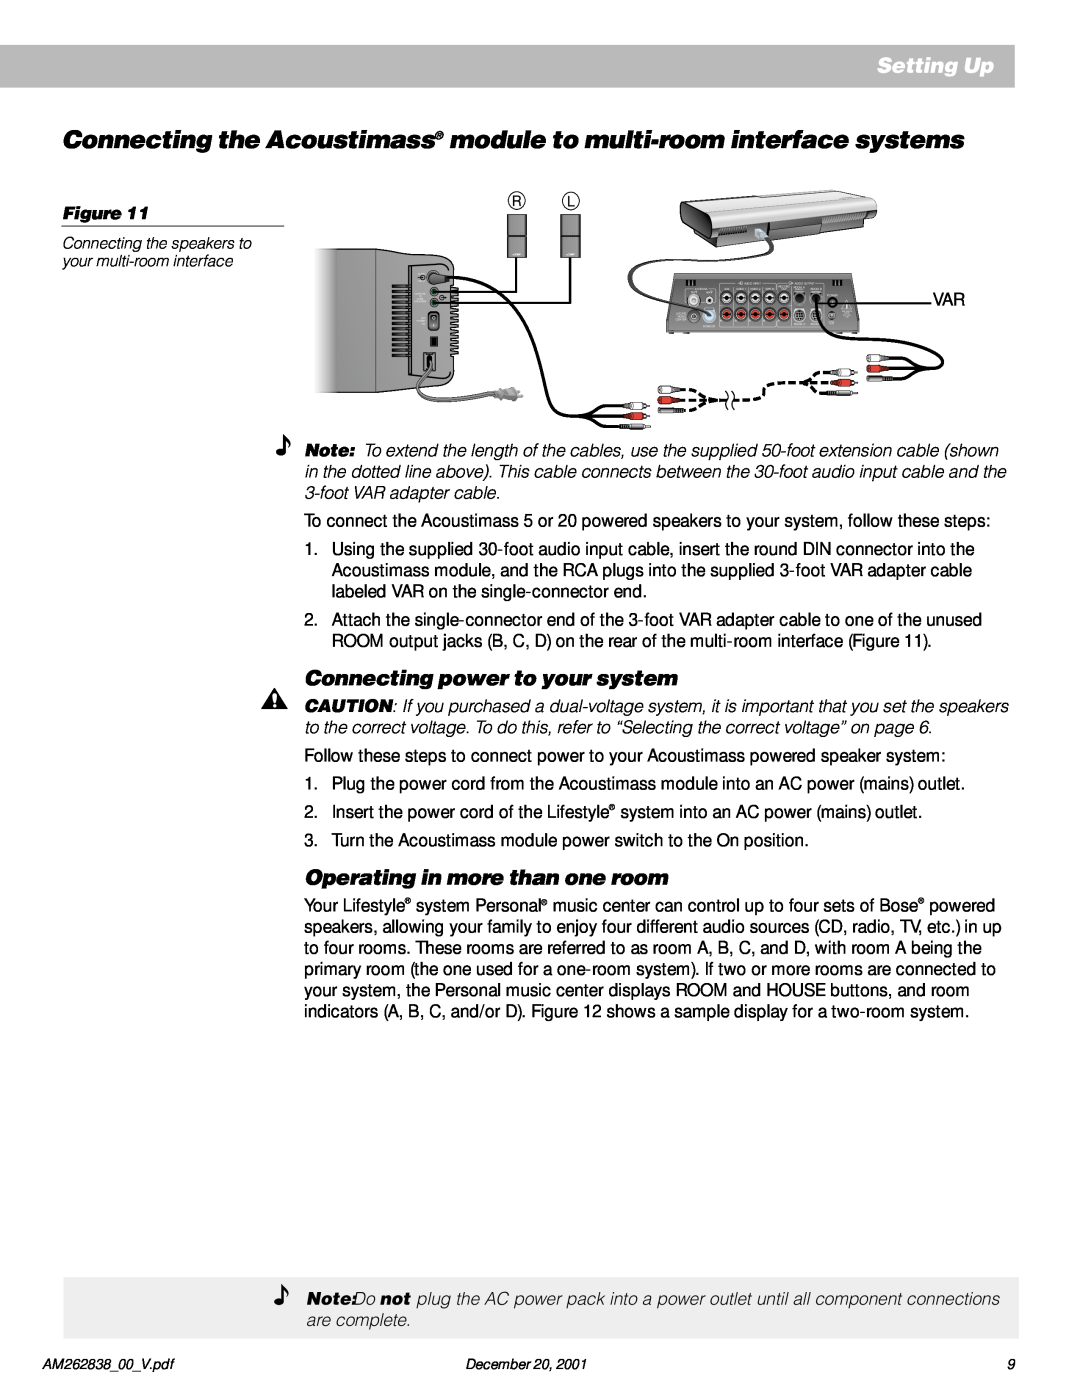 Bose AM262838_00_V Connecting the Acoustimass module to multi-room interface systems, Connecting power to your system 